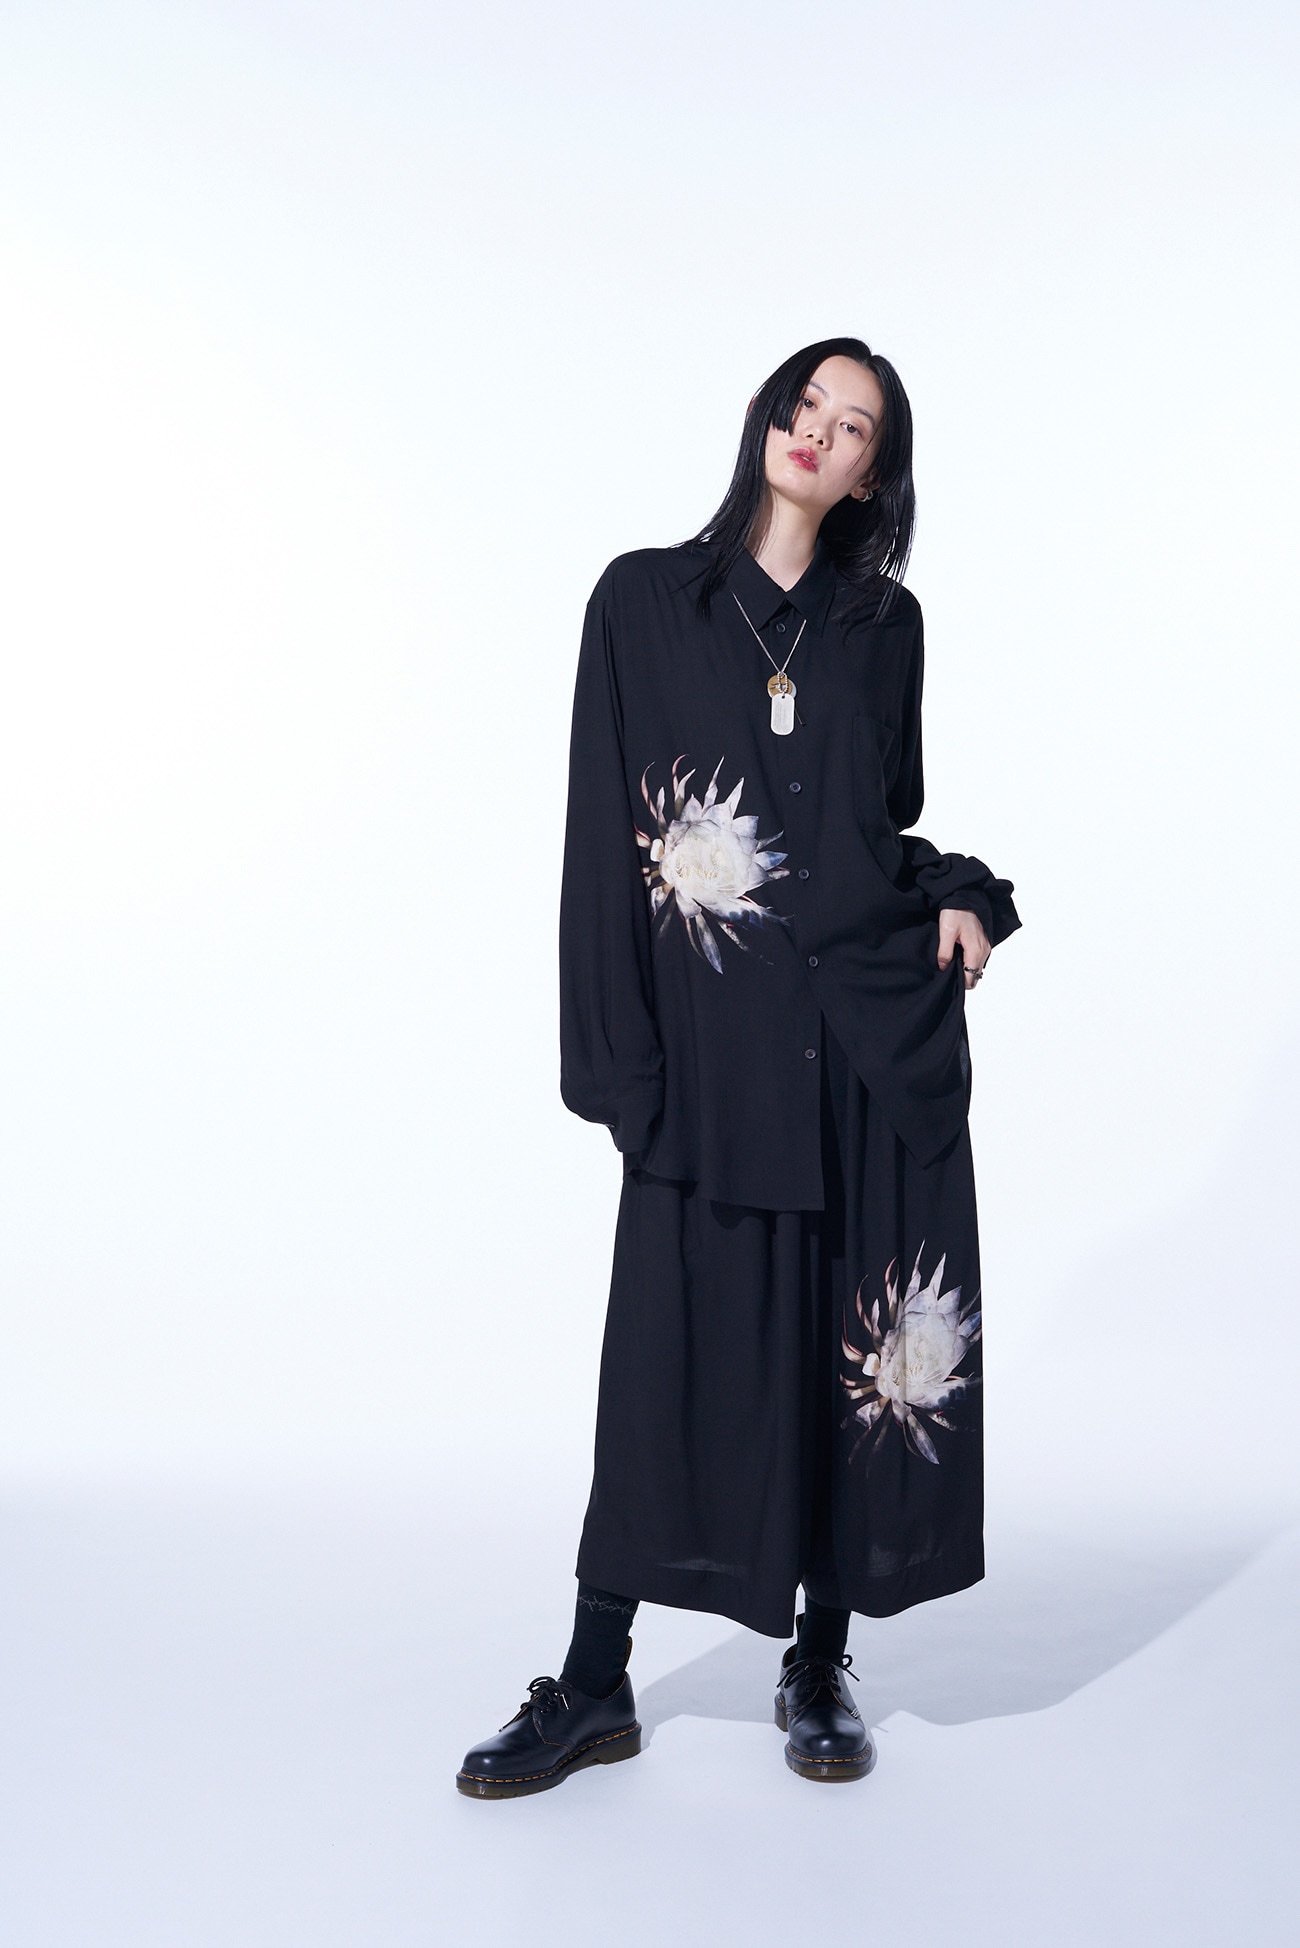 RAYON LOAN “QUEEN OF THE NIGHT“ PRINTED CULOTTE PANTS